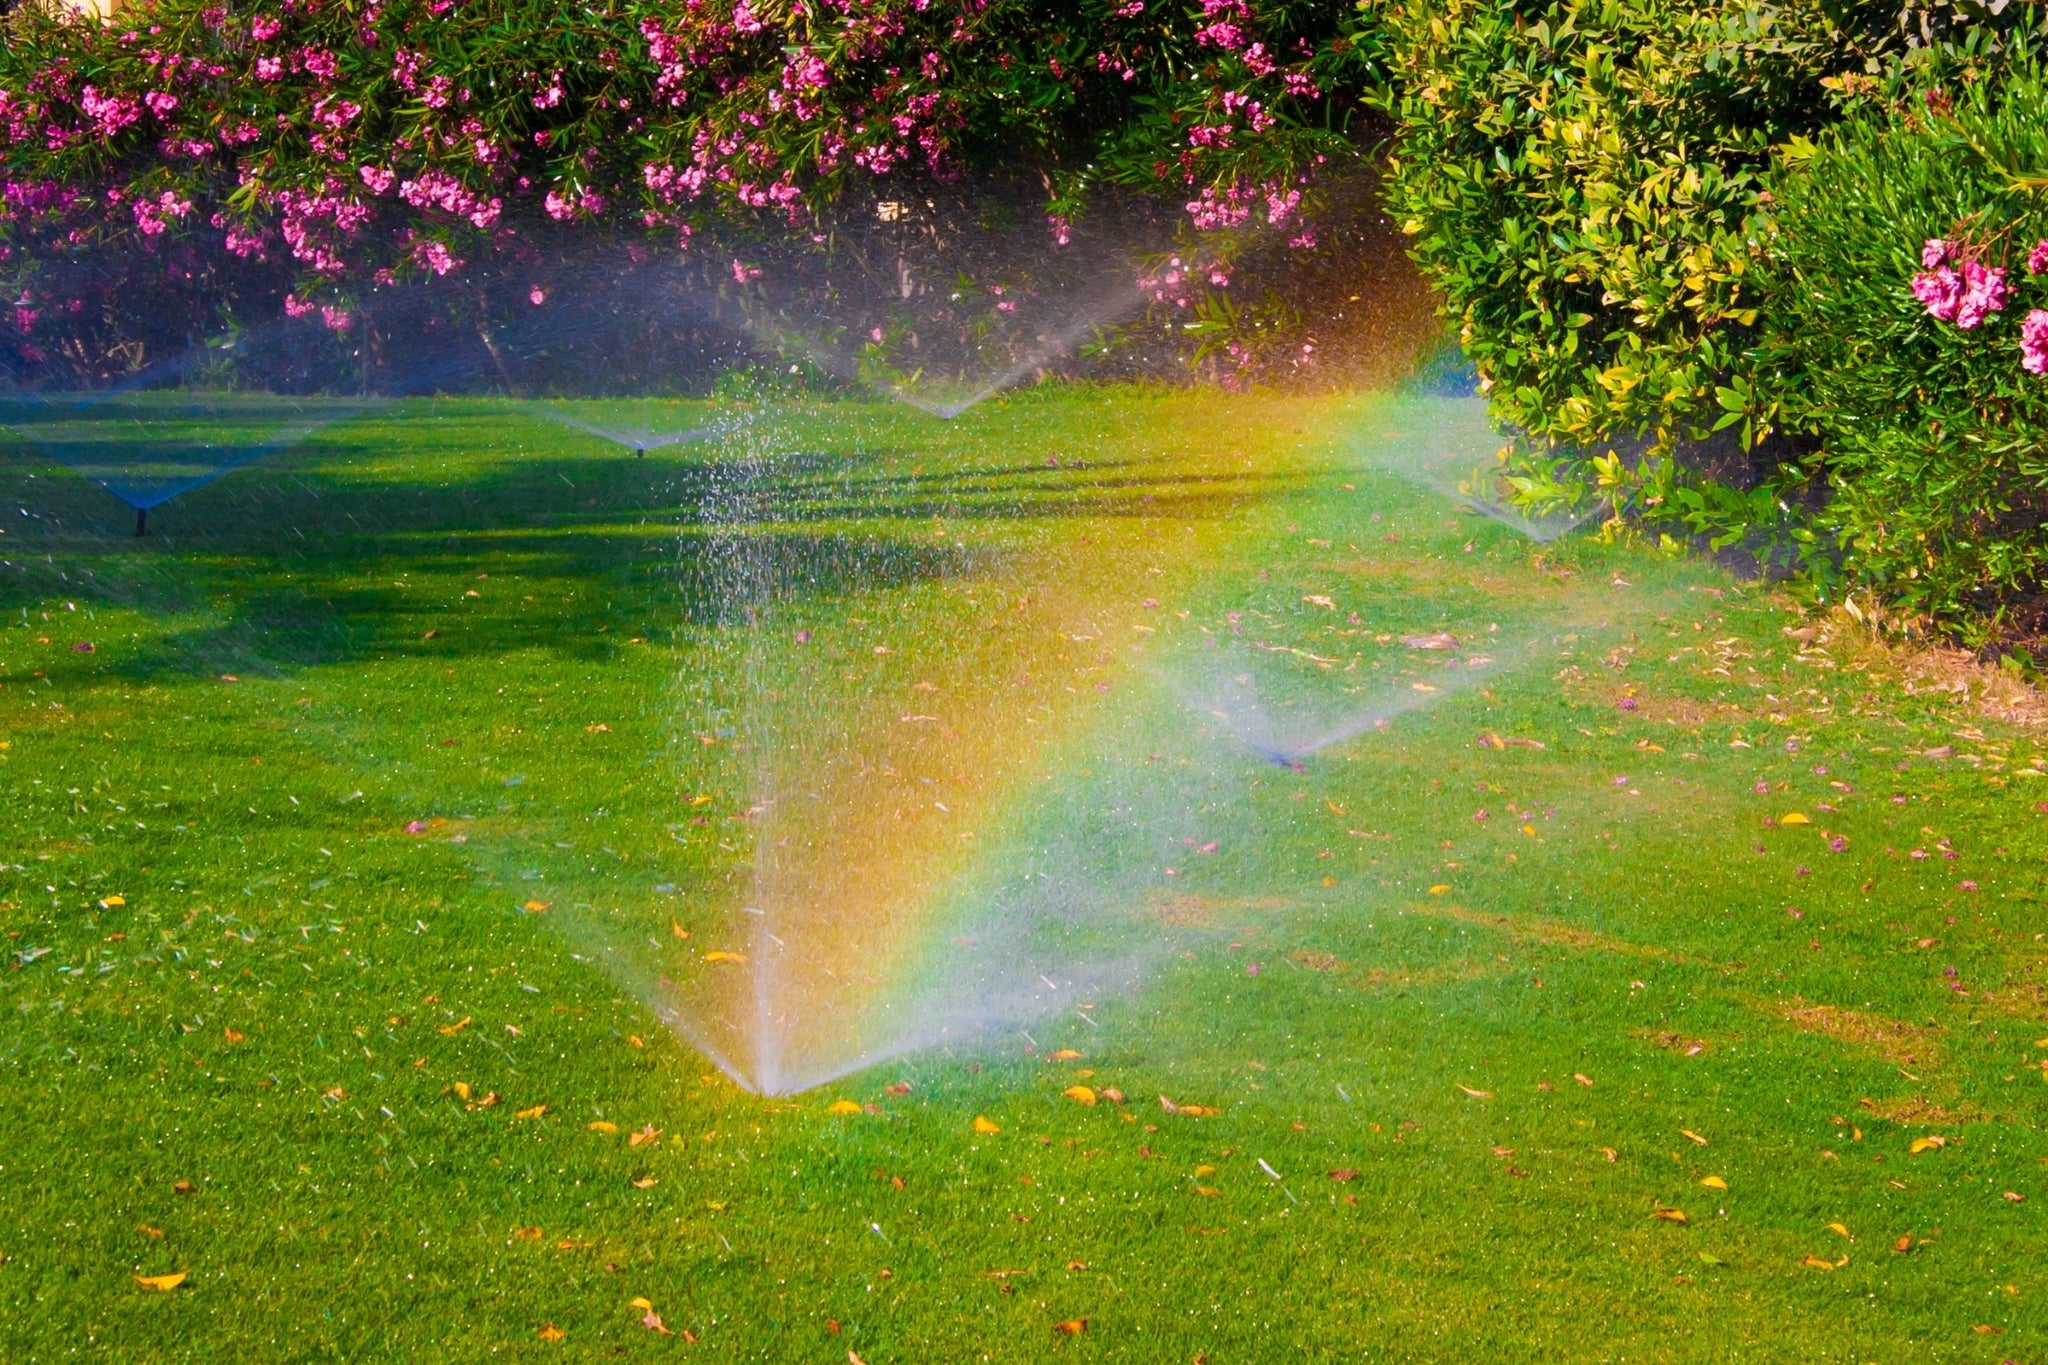 How to check for problems in your garden sprinklers